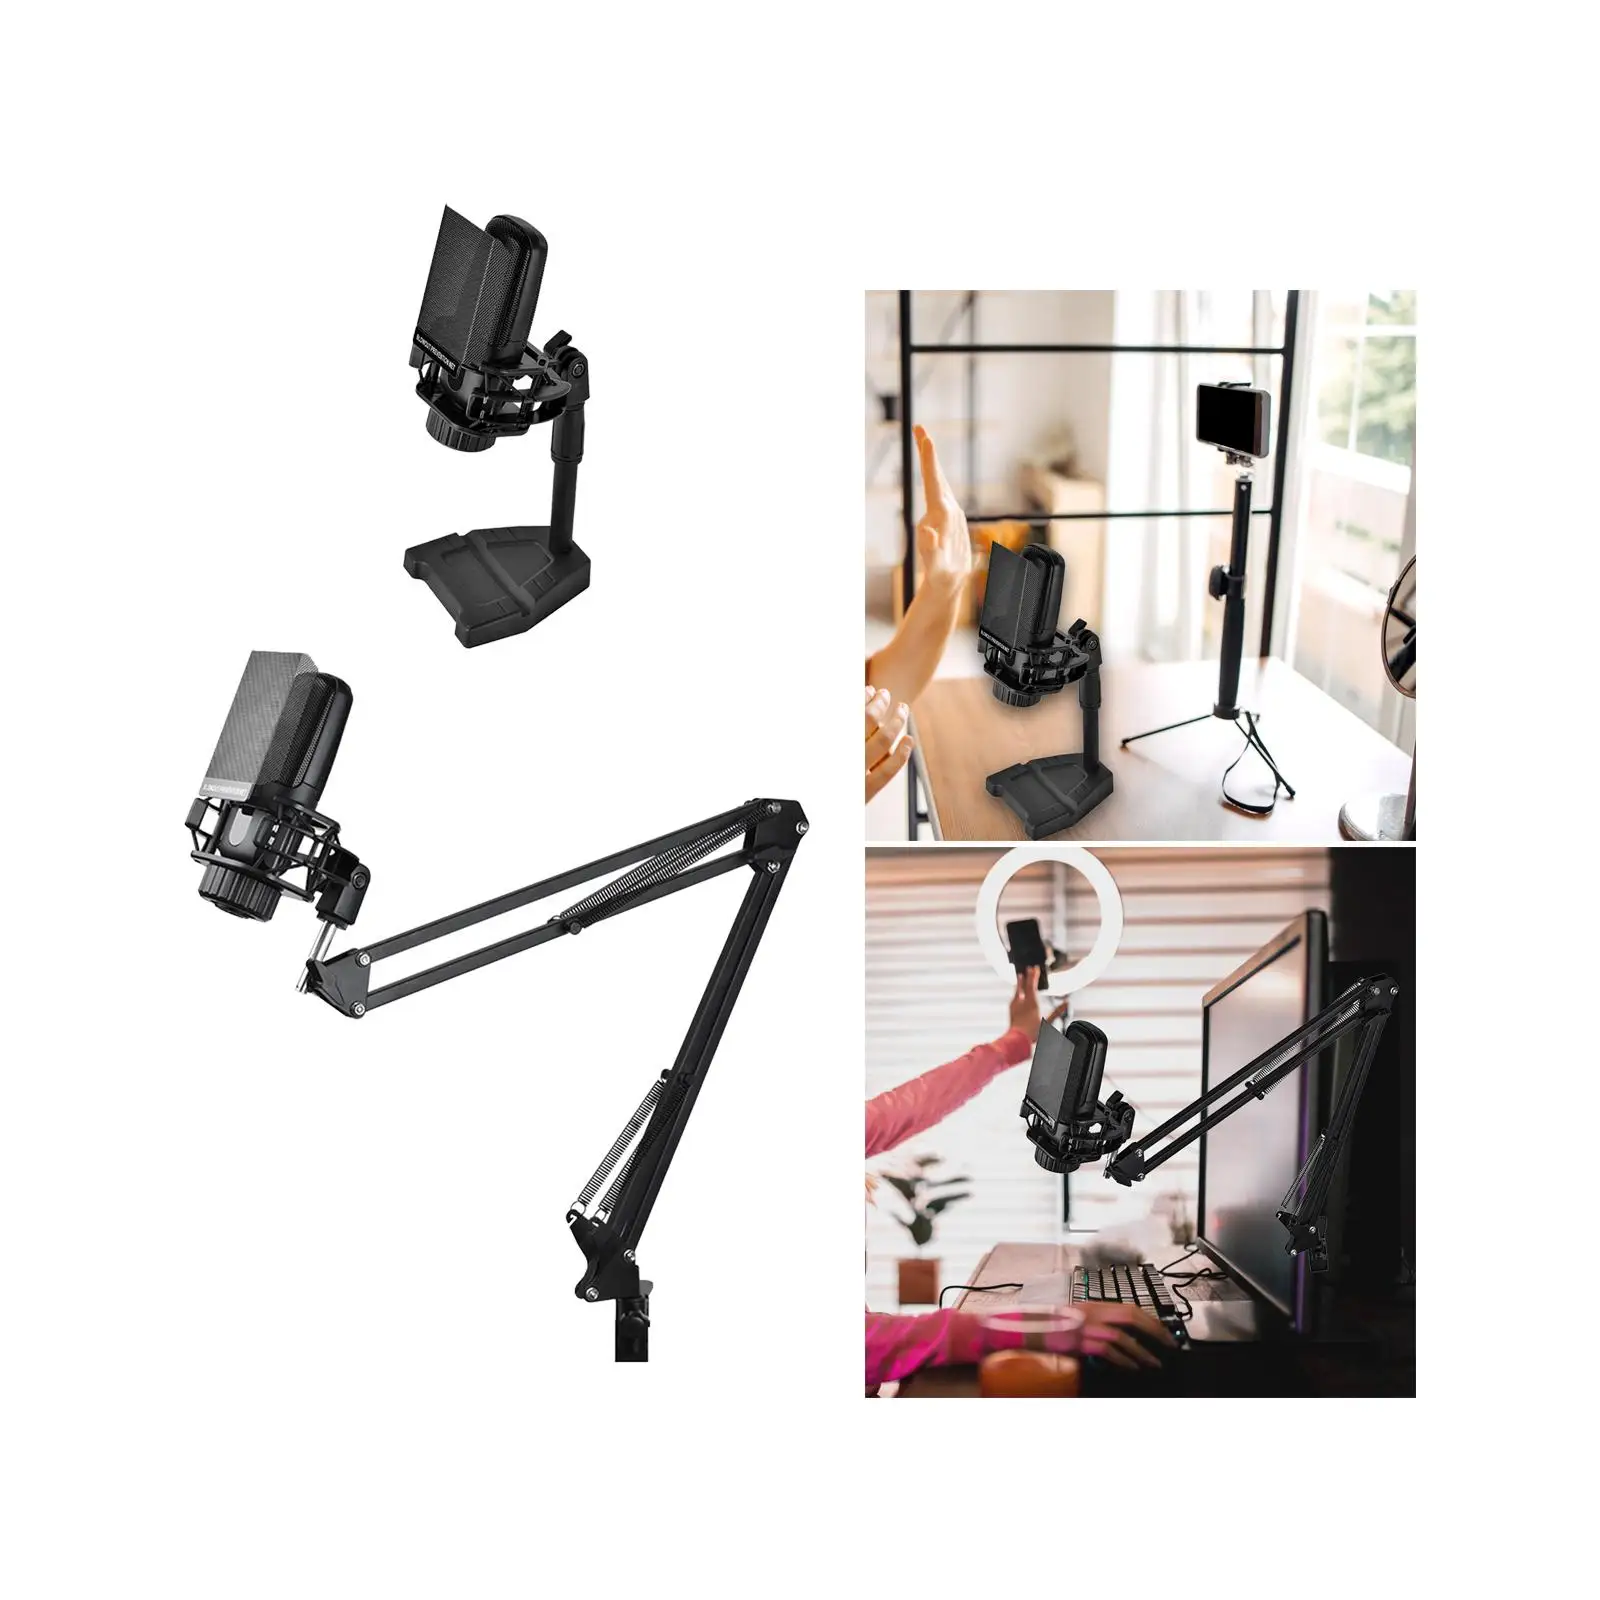 Microphone Arm Stand with Microphone Foldable Universal Desktop Holder Heavy Duty Mic Suspension Mount for Gaming Live Streaming